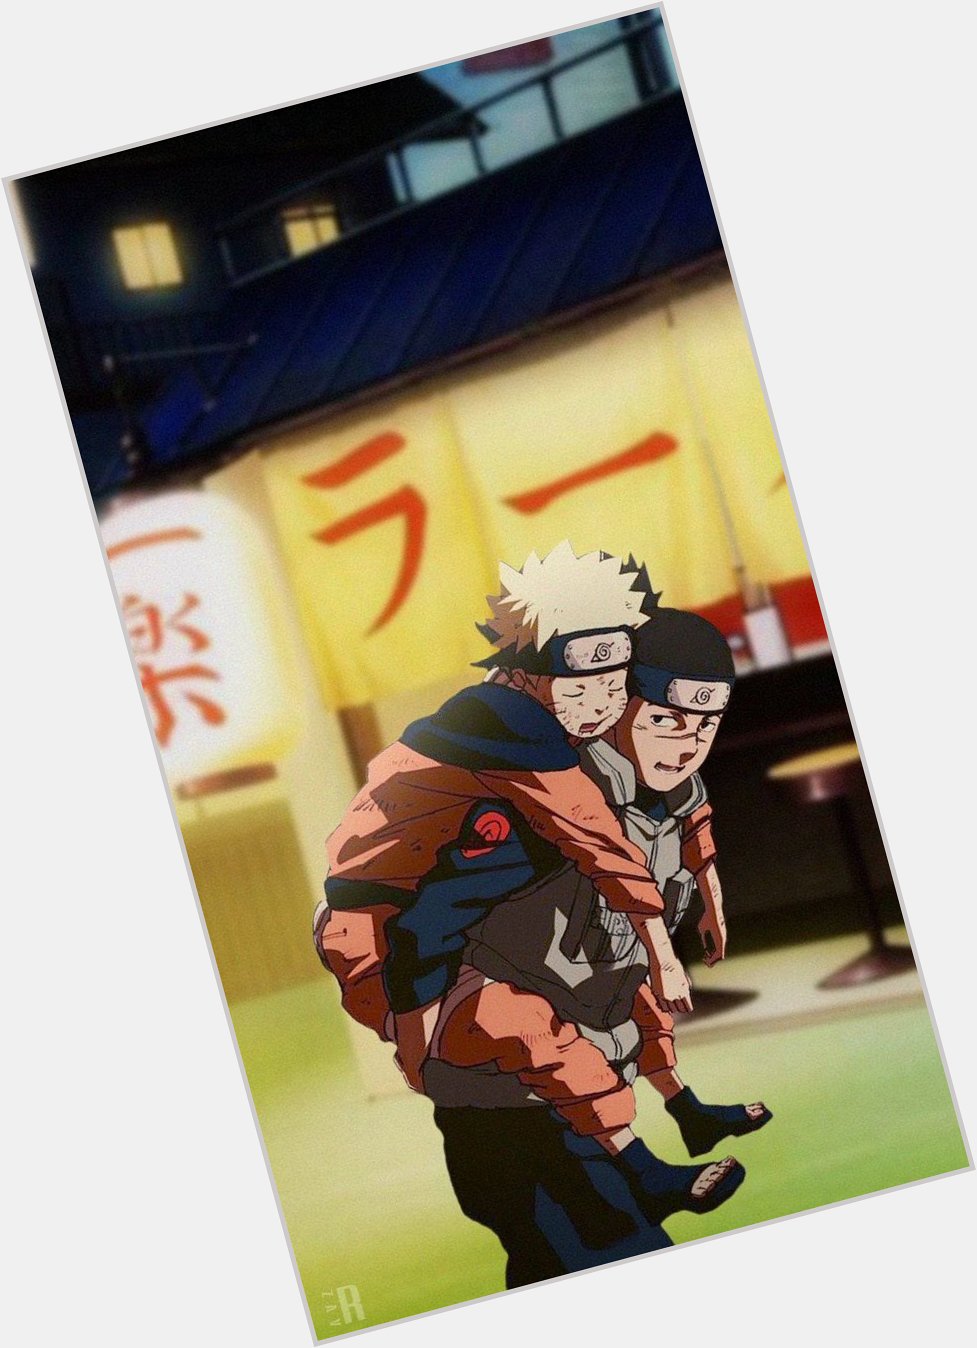 Happy birthday Naruto Uzumaki and thank you for carrying my childhood on your shoulders. BELIEVE IT! 